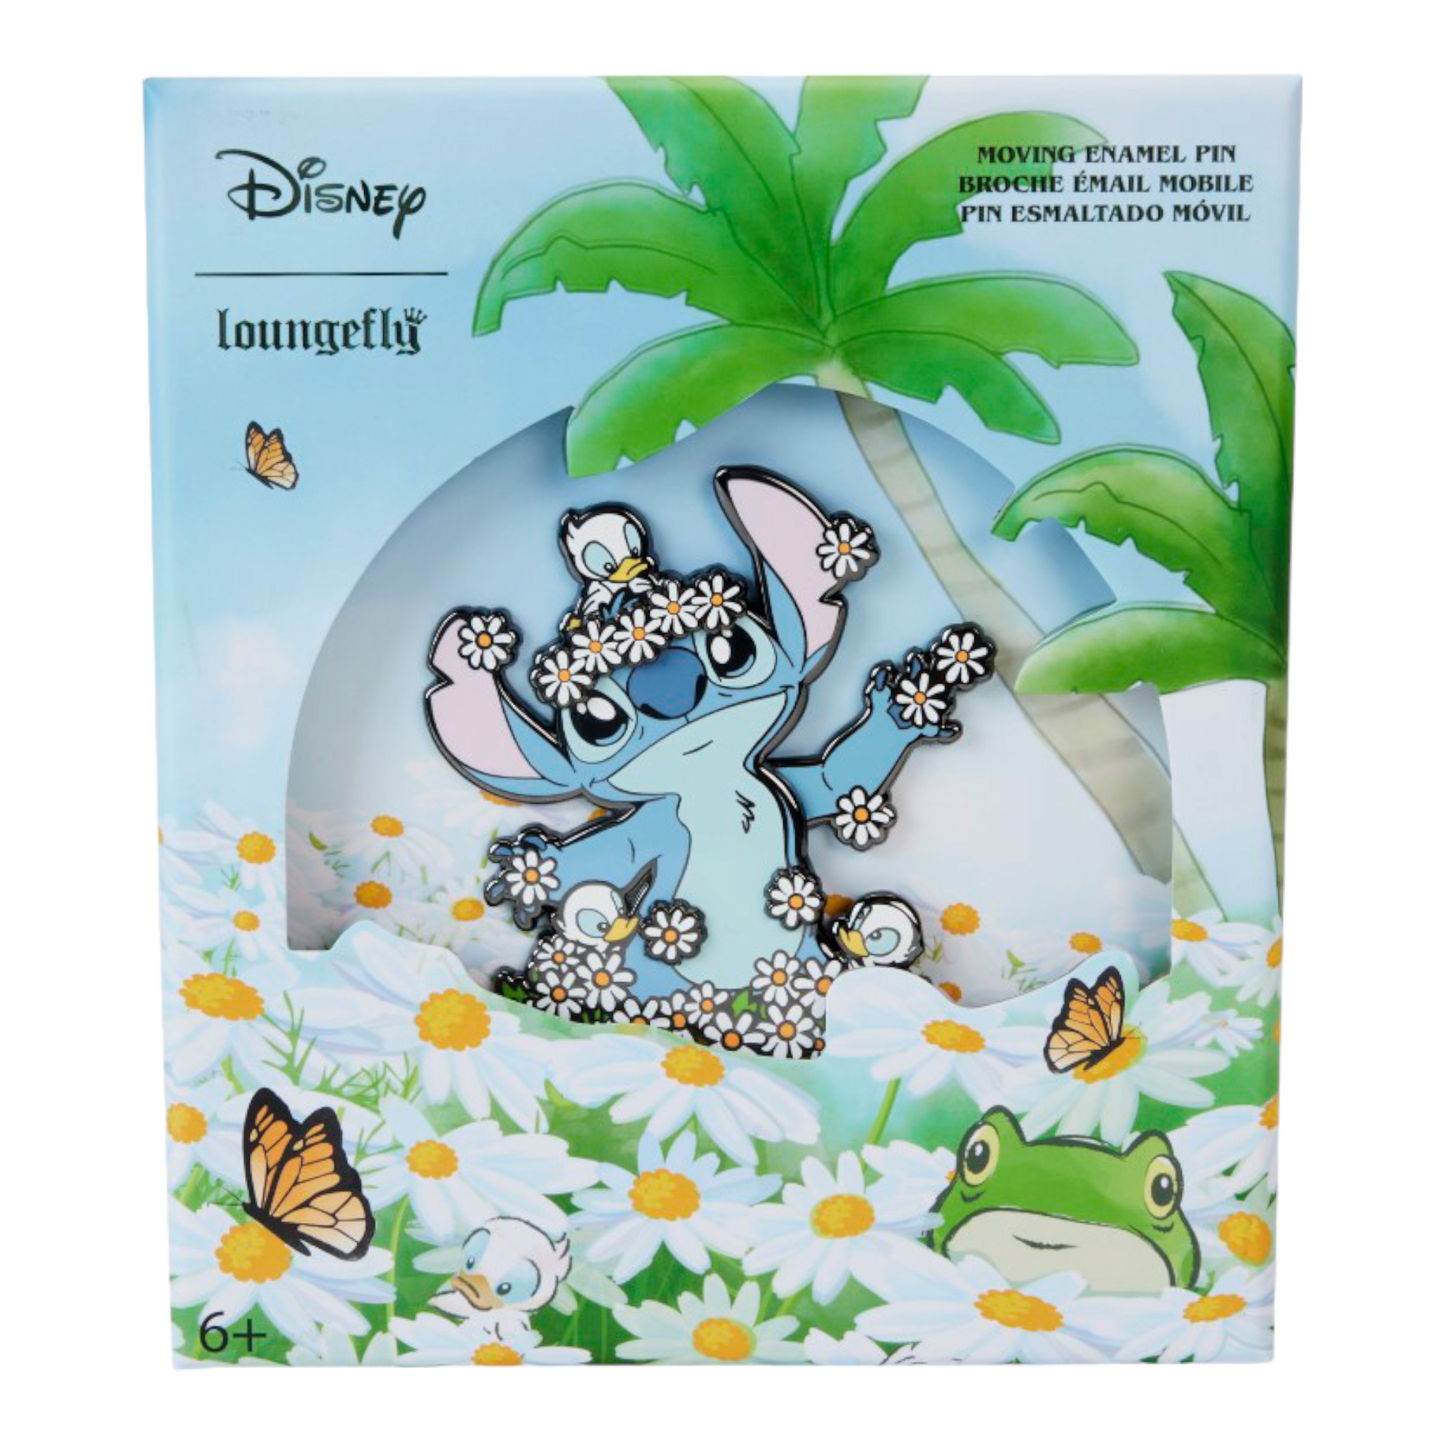 Pin's de collection - Collector Box Pin - Lilo And Stitch Springtime Stitch - Disney - Loungefly J'M T Créa